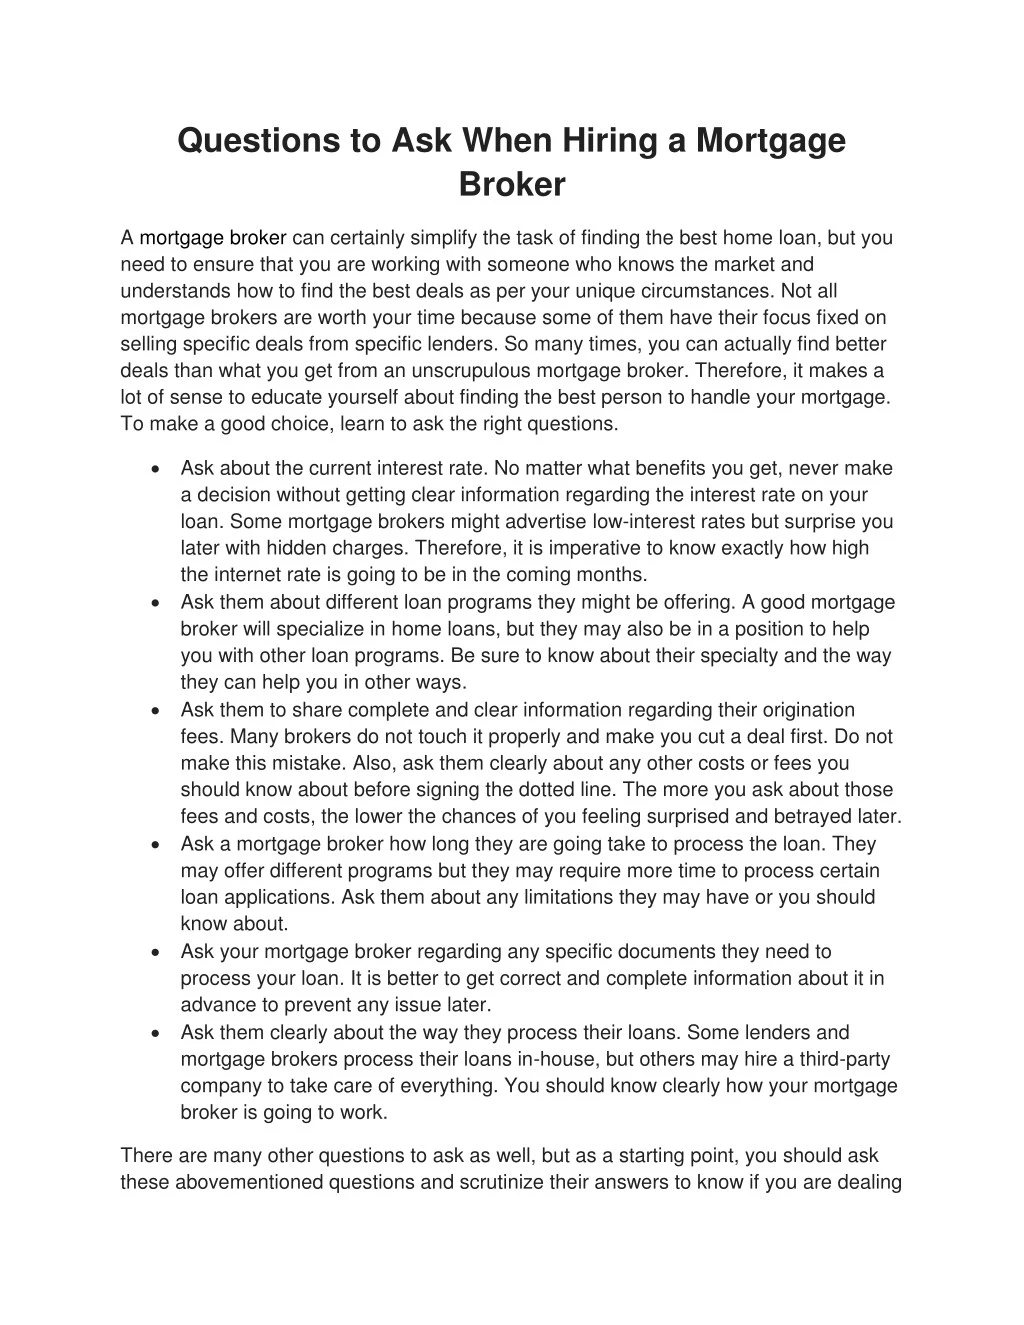 questions to ask when hiring a mortgage broker